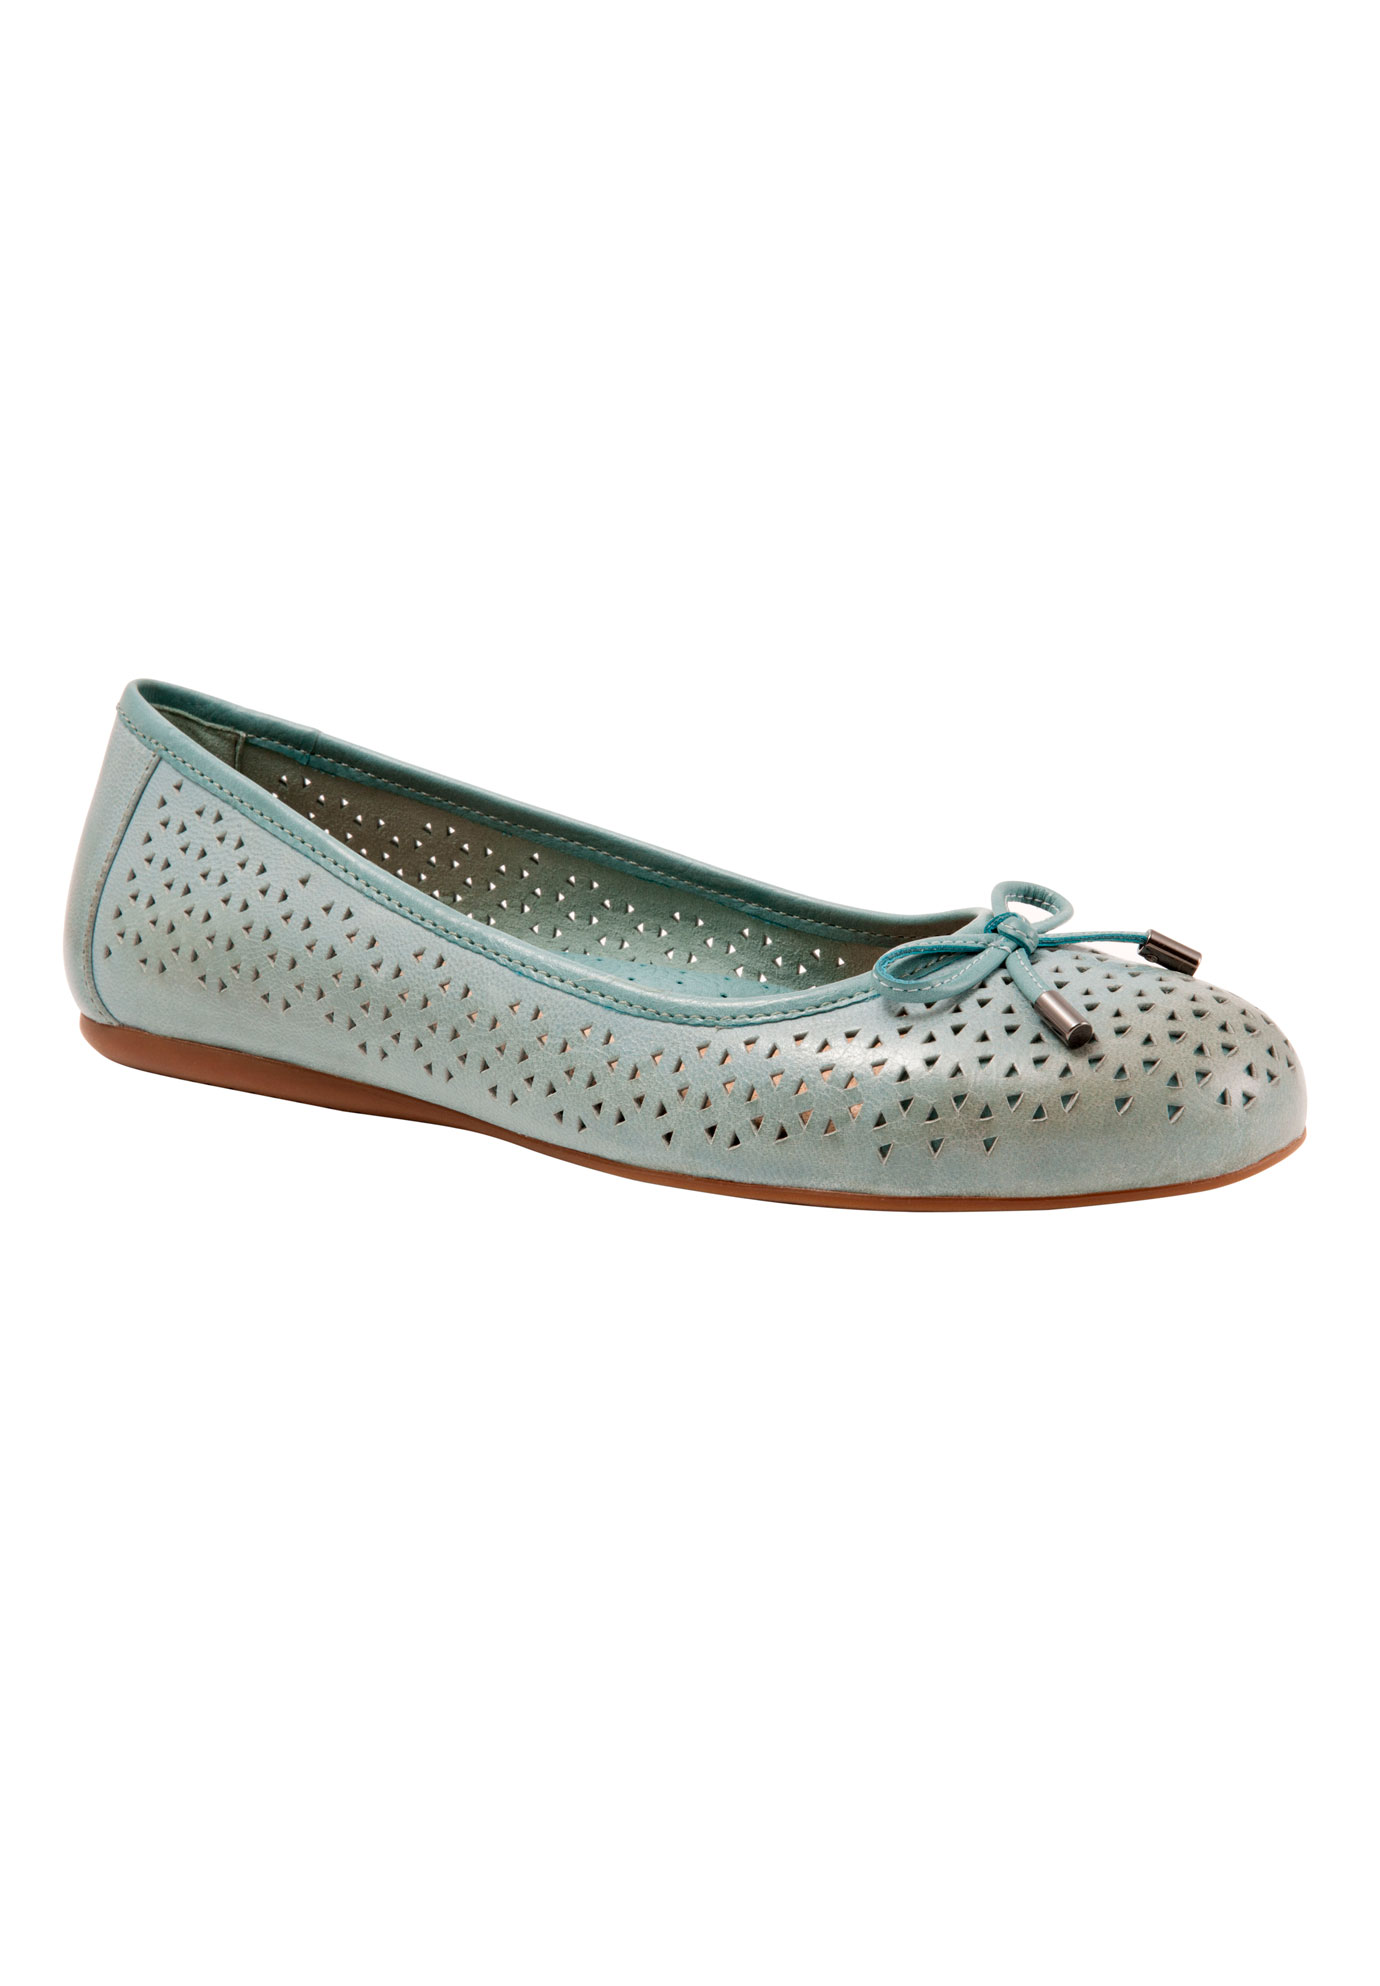 Napa Laser Flats by SoftWalk®| Plus Size Flats | Woman Within